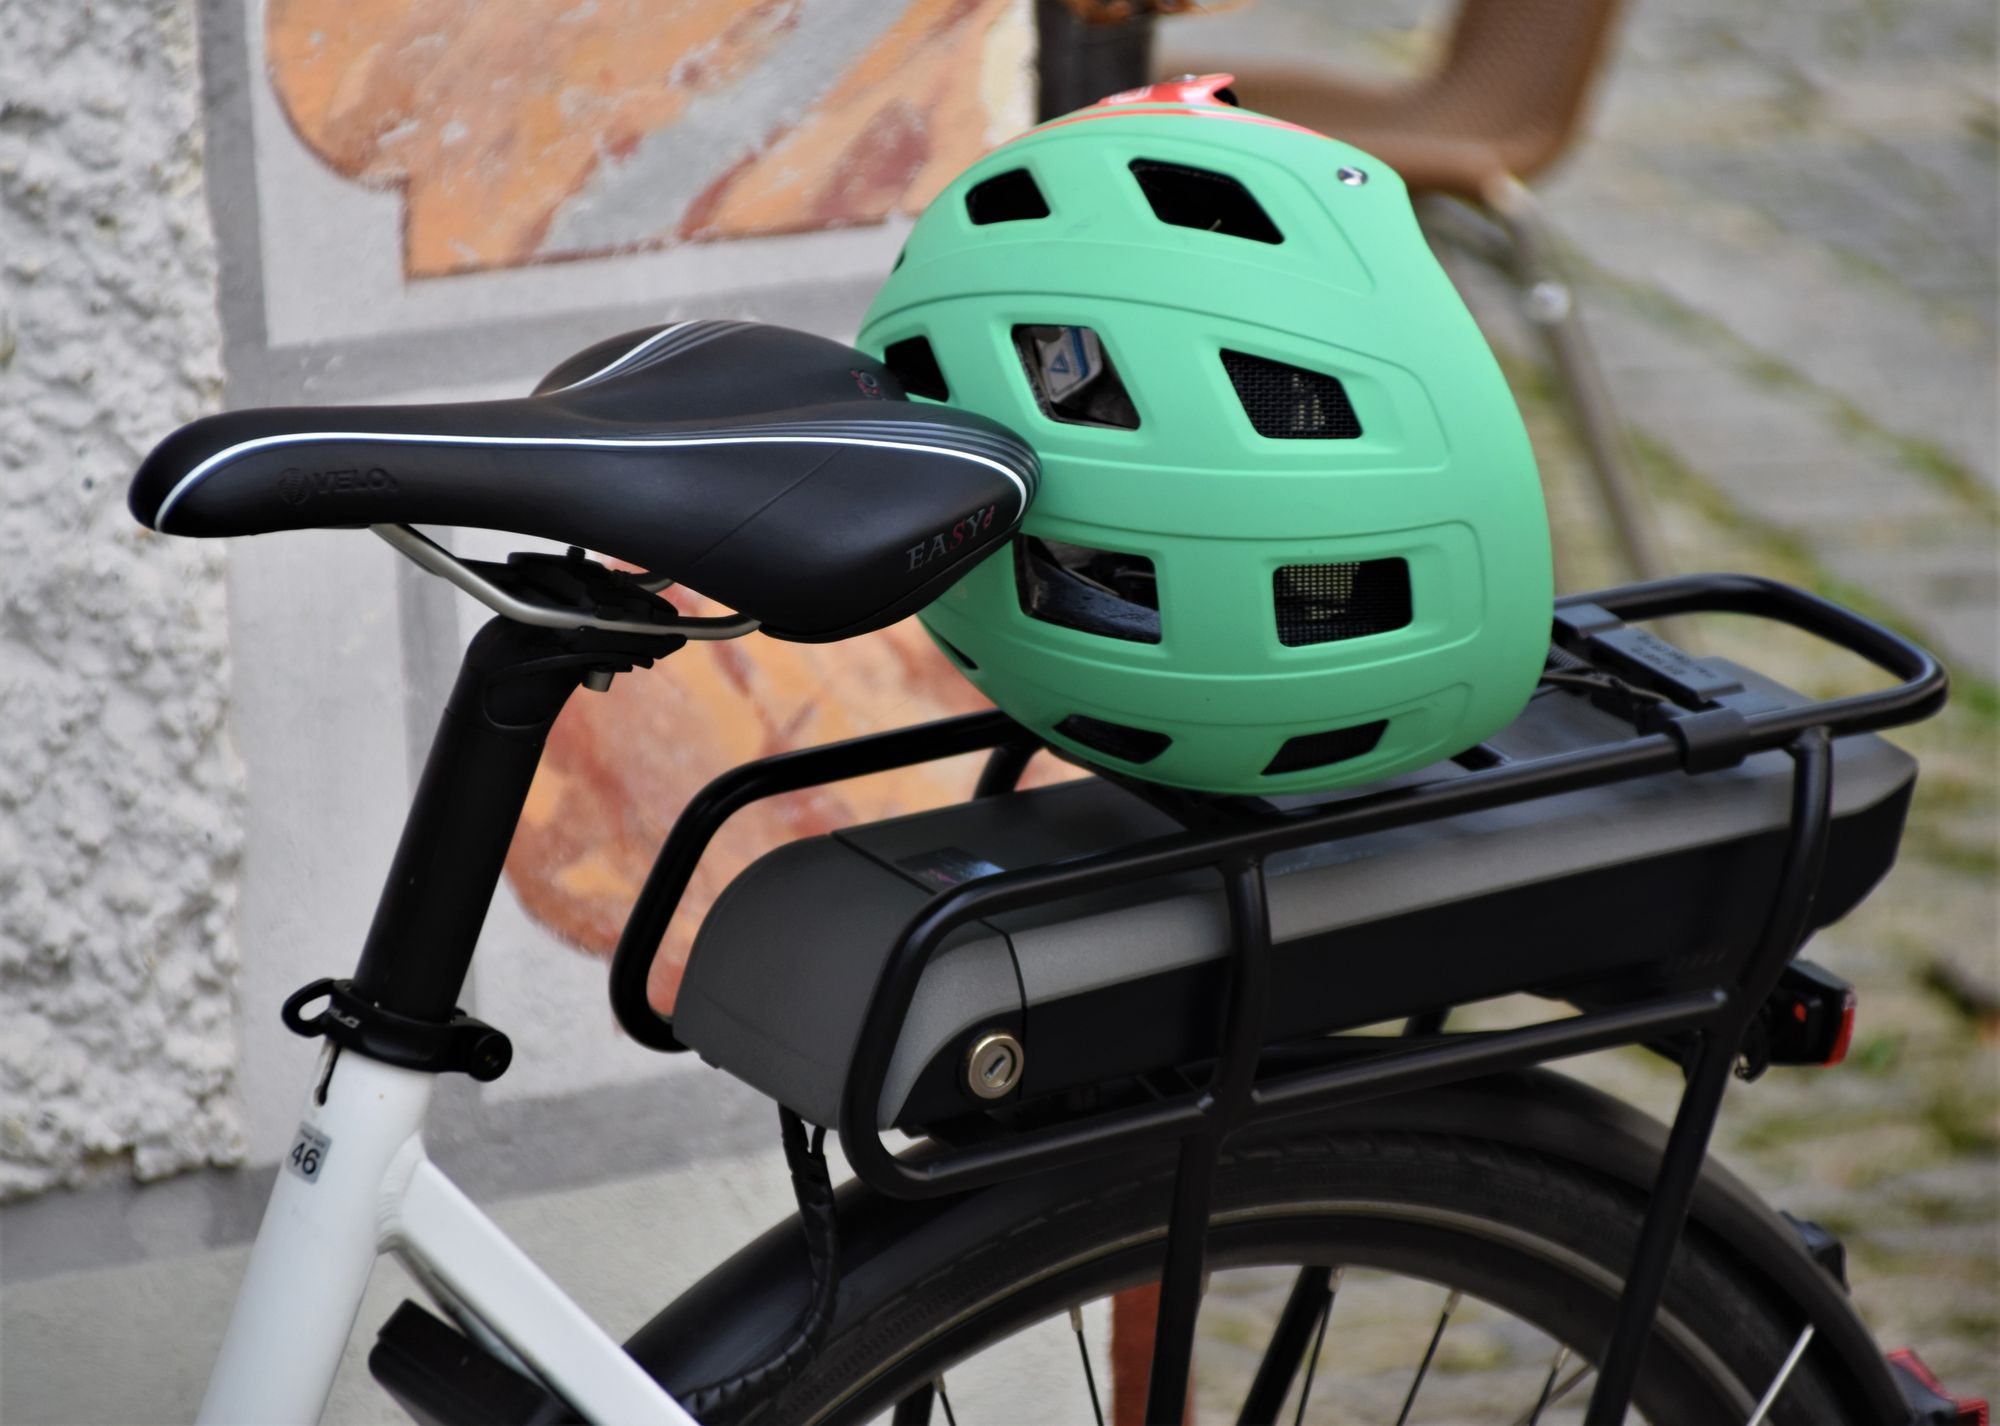 A green helmet rests on top of the bike's luggage compartment.